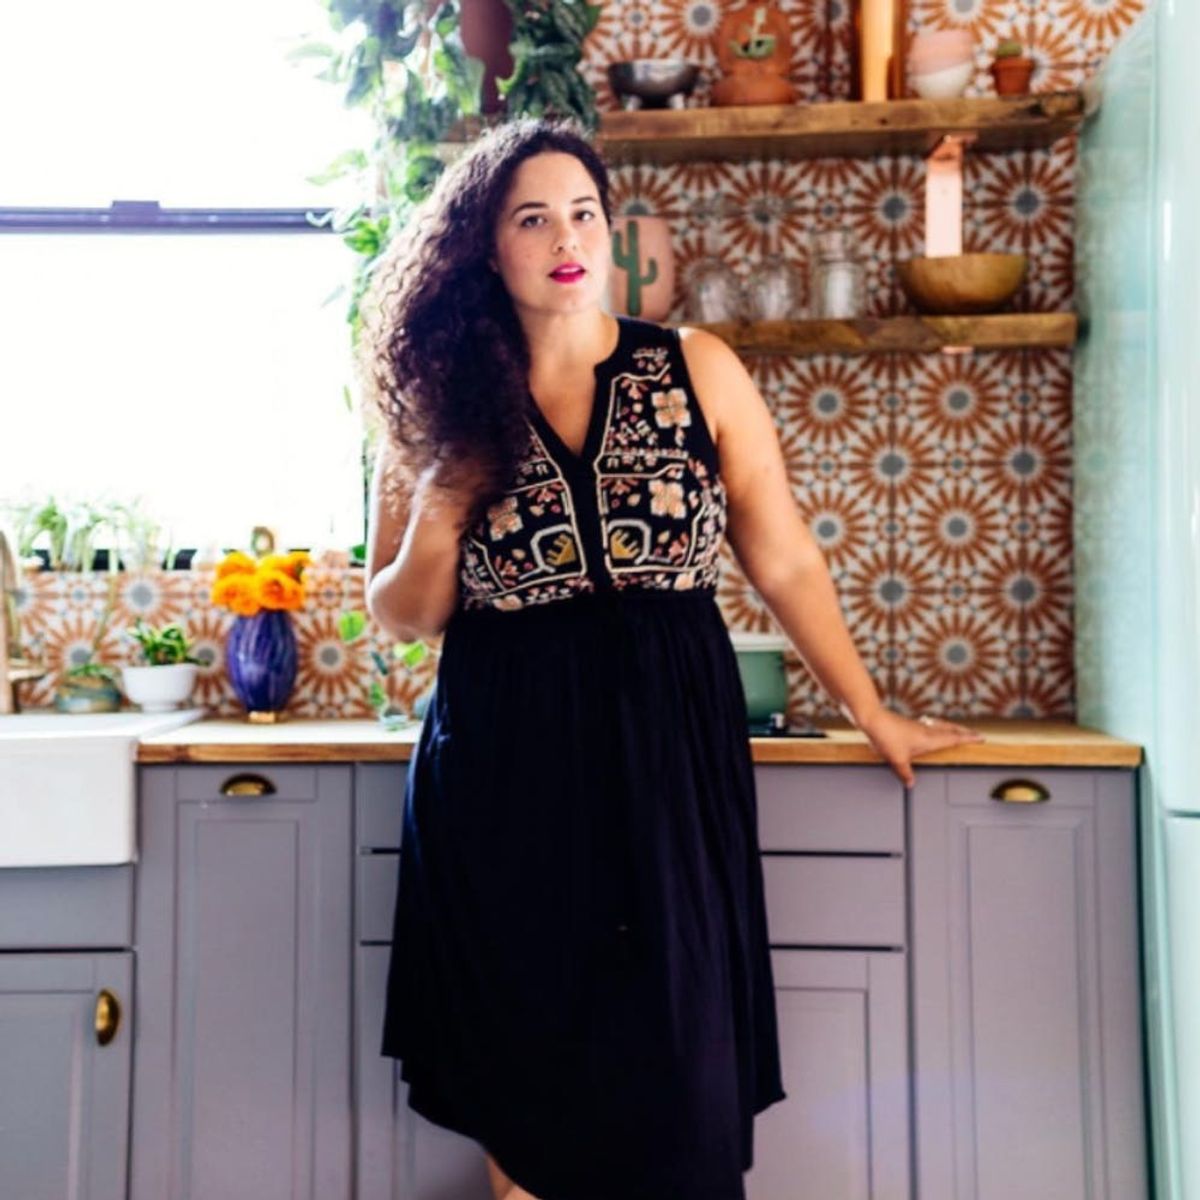 Justina Blakeney Dishes on the Inspo Behind Her Boho-Tastic Empire